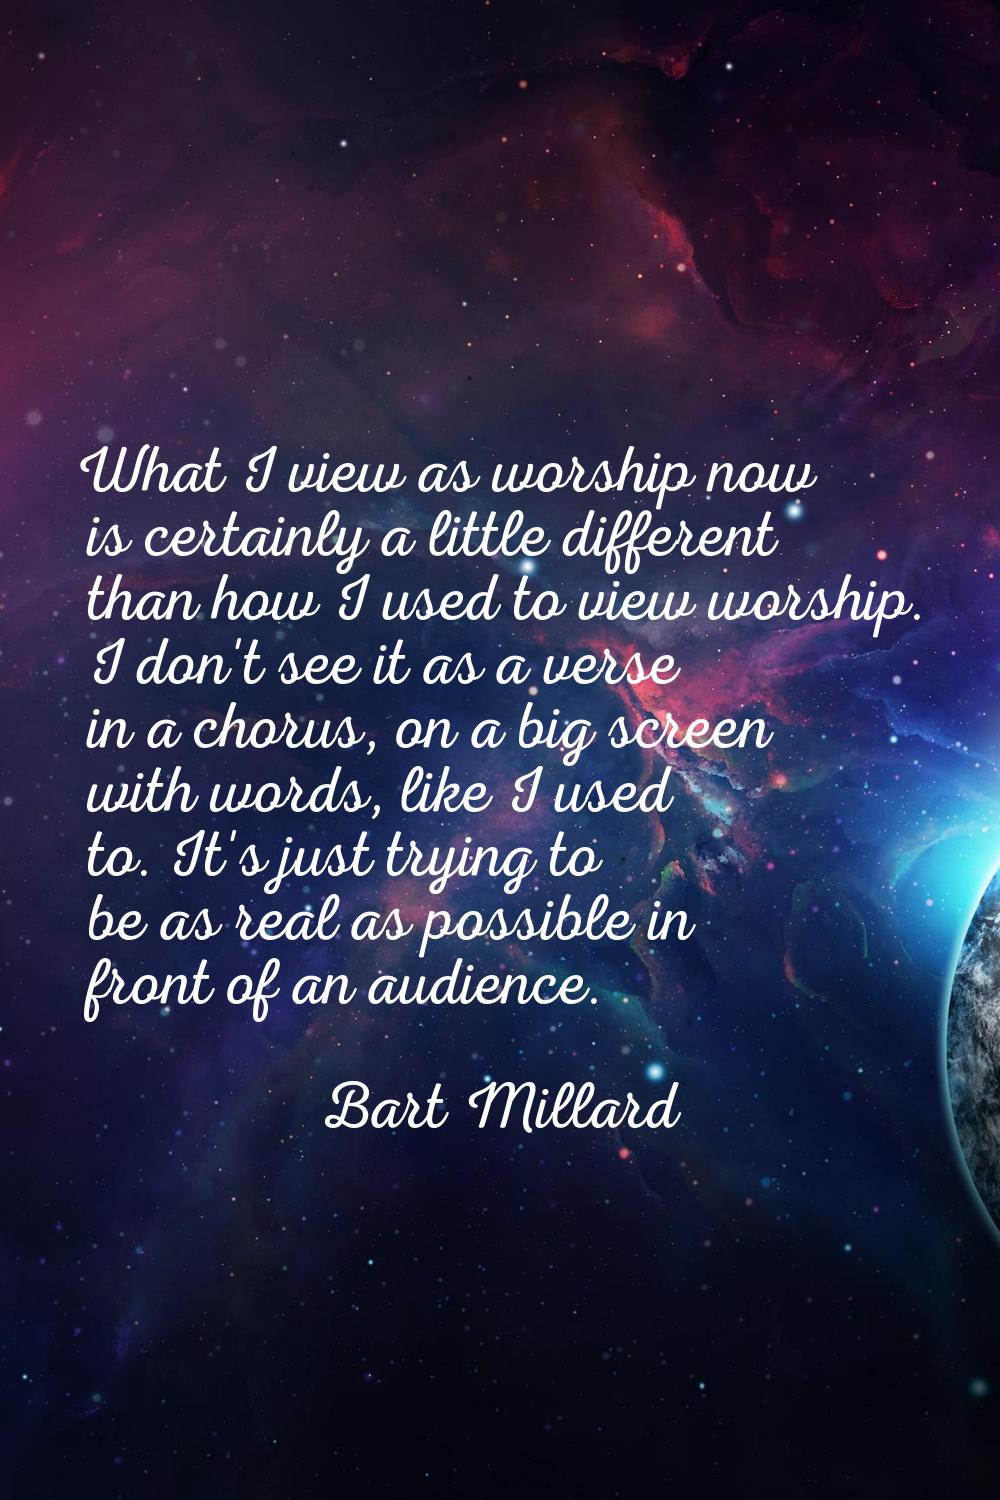 What I view as worship now is certainly a little different than how I used to view worship. I don't